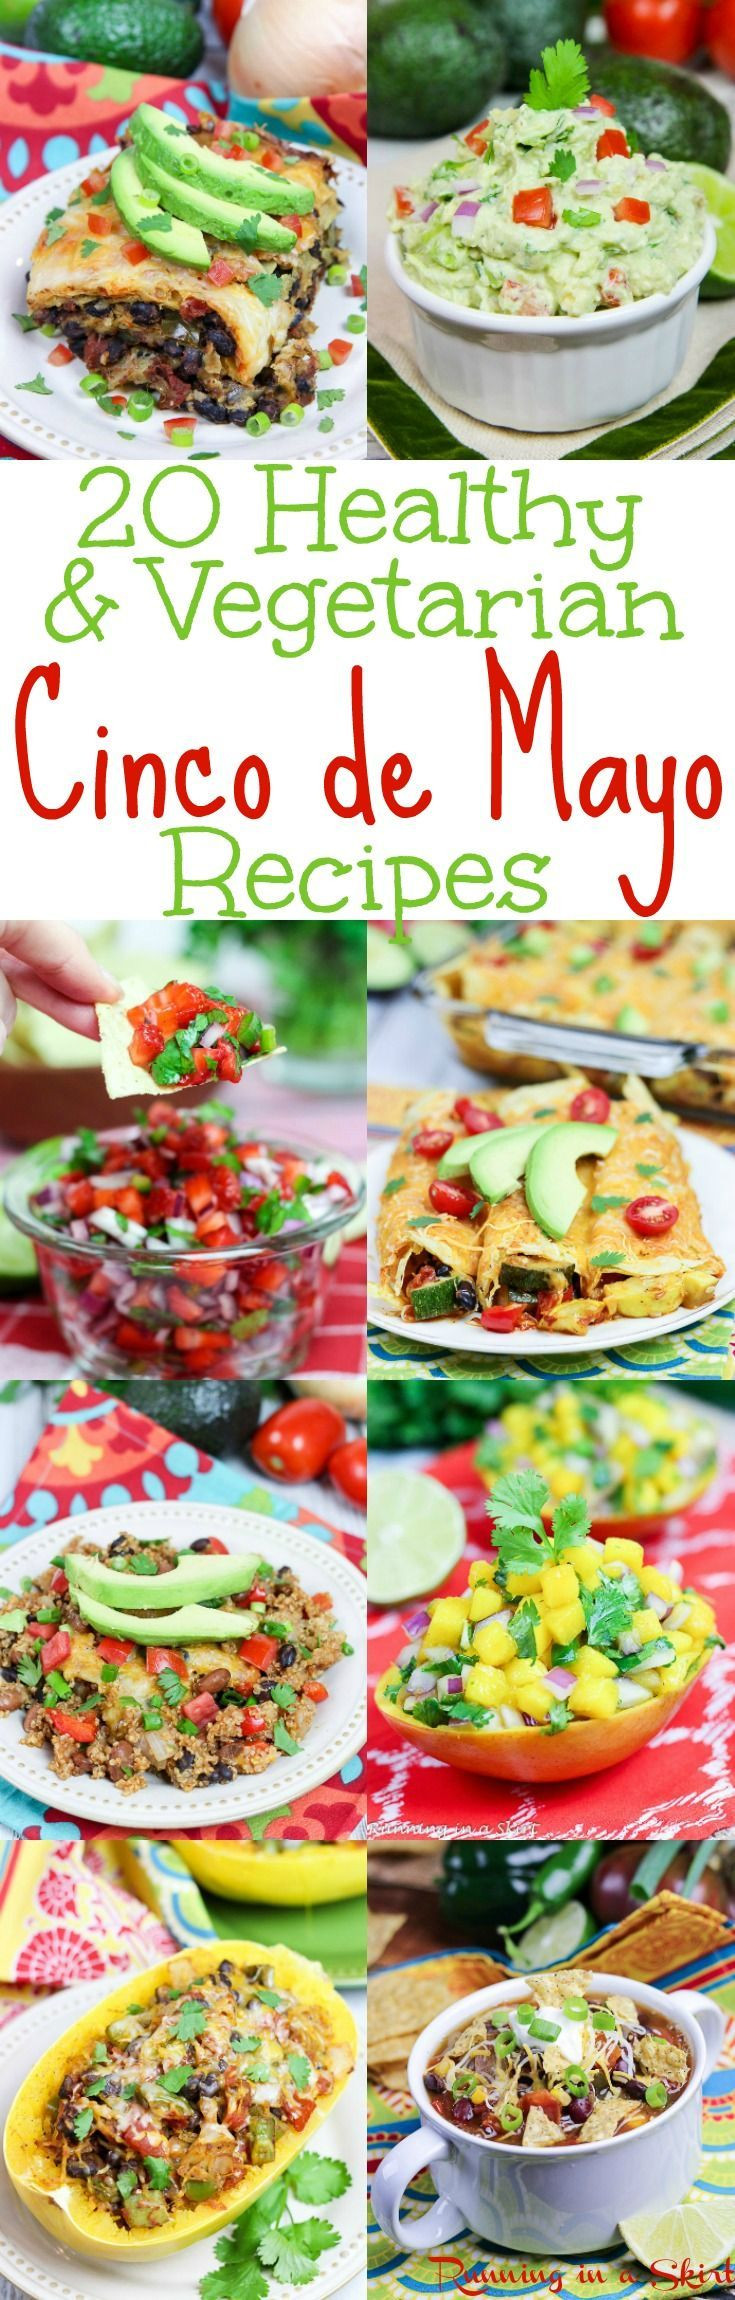 Mayo Clinic Diabetic Recipes
 17 Best ideas about Mayo Clinic Diet on Pinterest